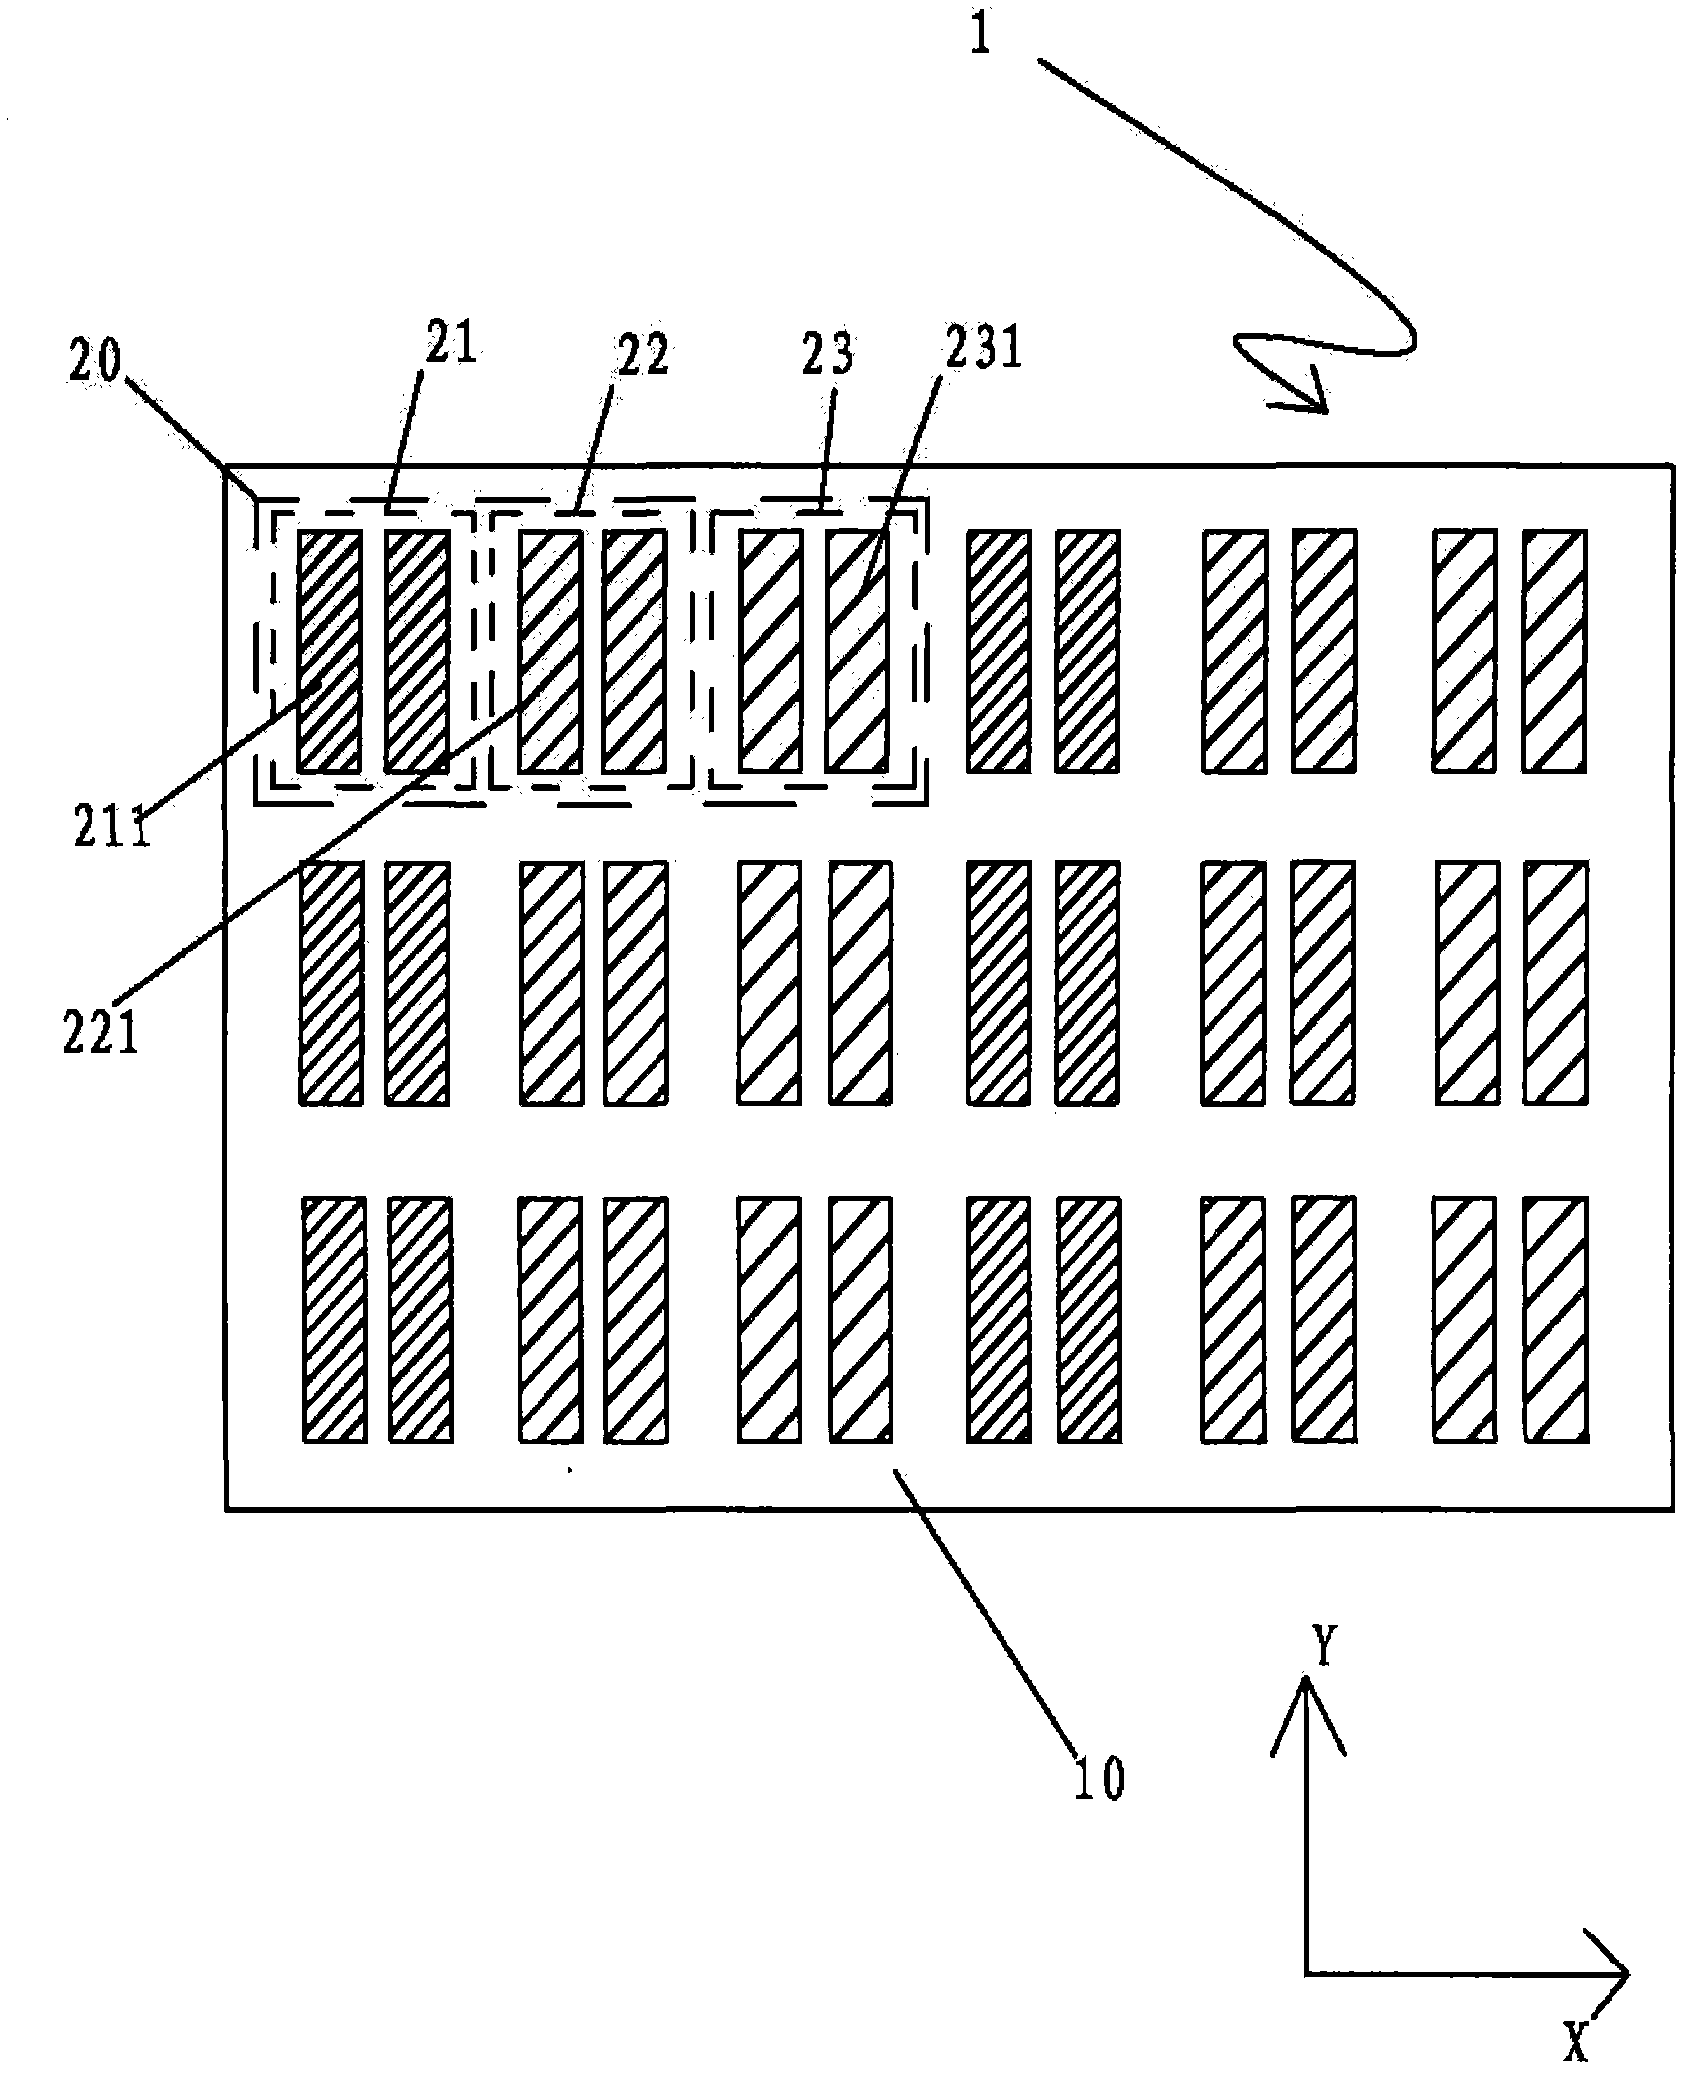 Pixel structure of organic light emitting diode (OLED)